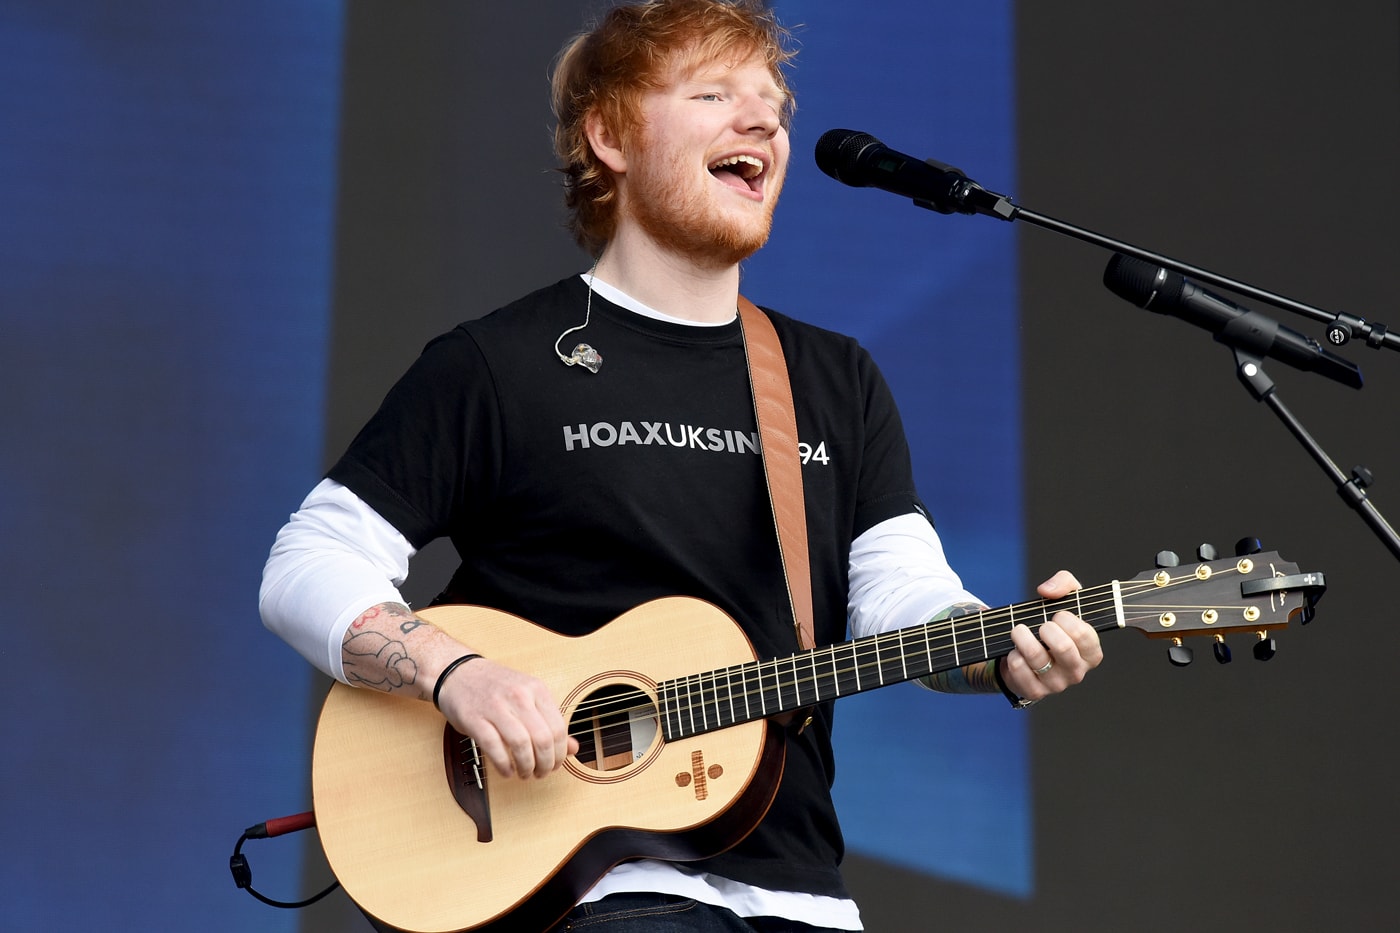 Ed Sheeran Shares "Castle on the Hill" & "Shape of You"